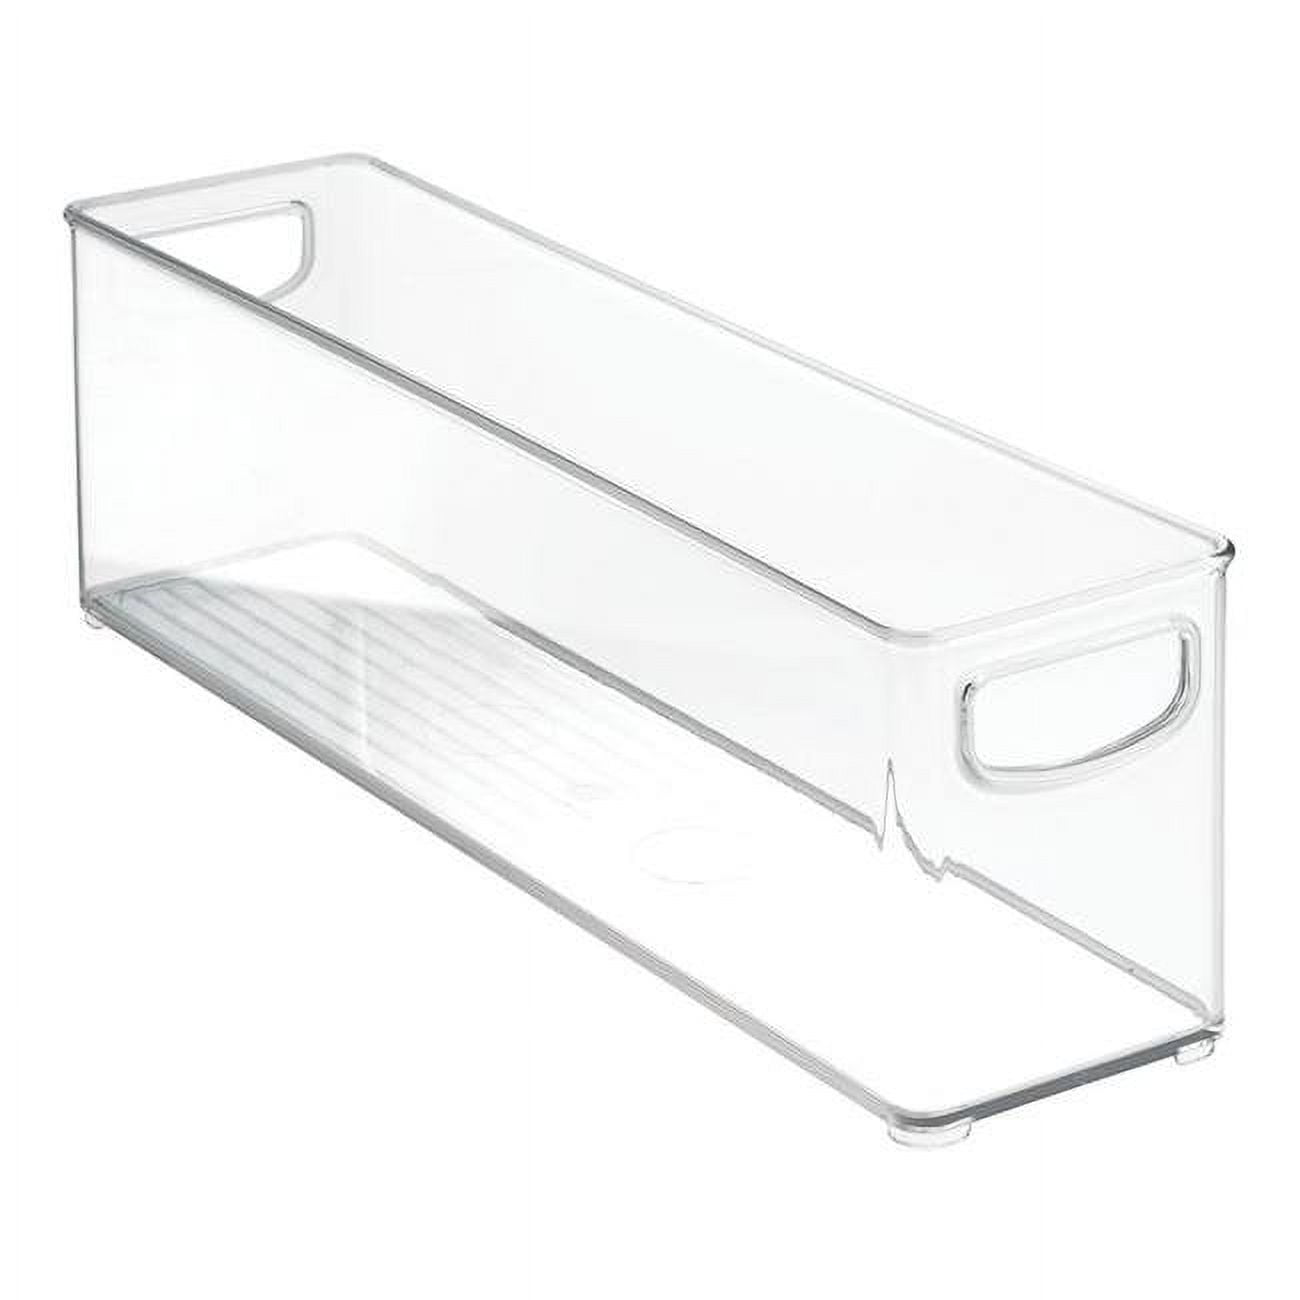 Greeting Card Organizer with Dividers, Clear Plastic Box, 10” Long x 8 ½”  Wide x 7 ½” High